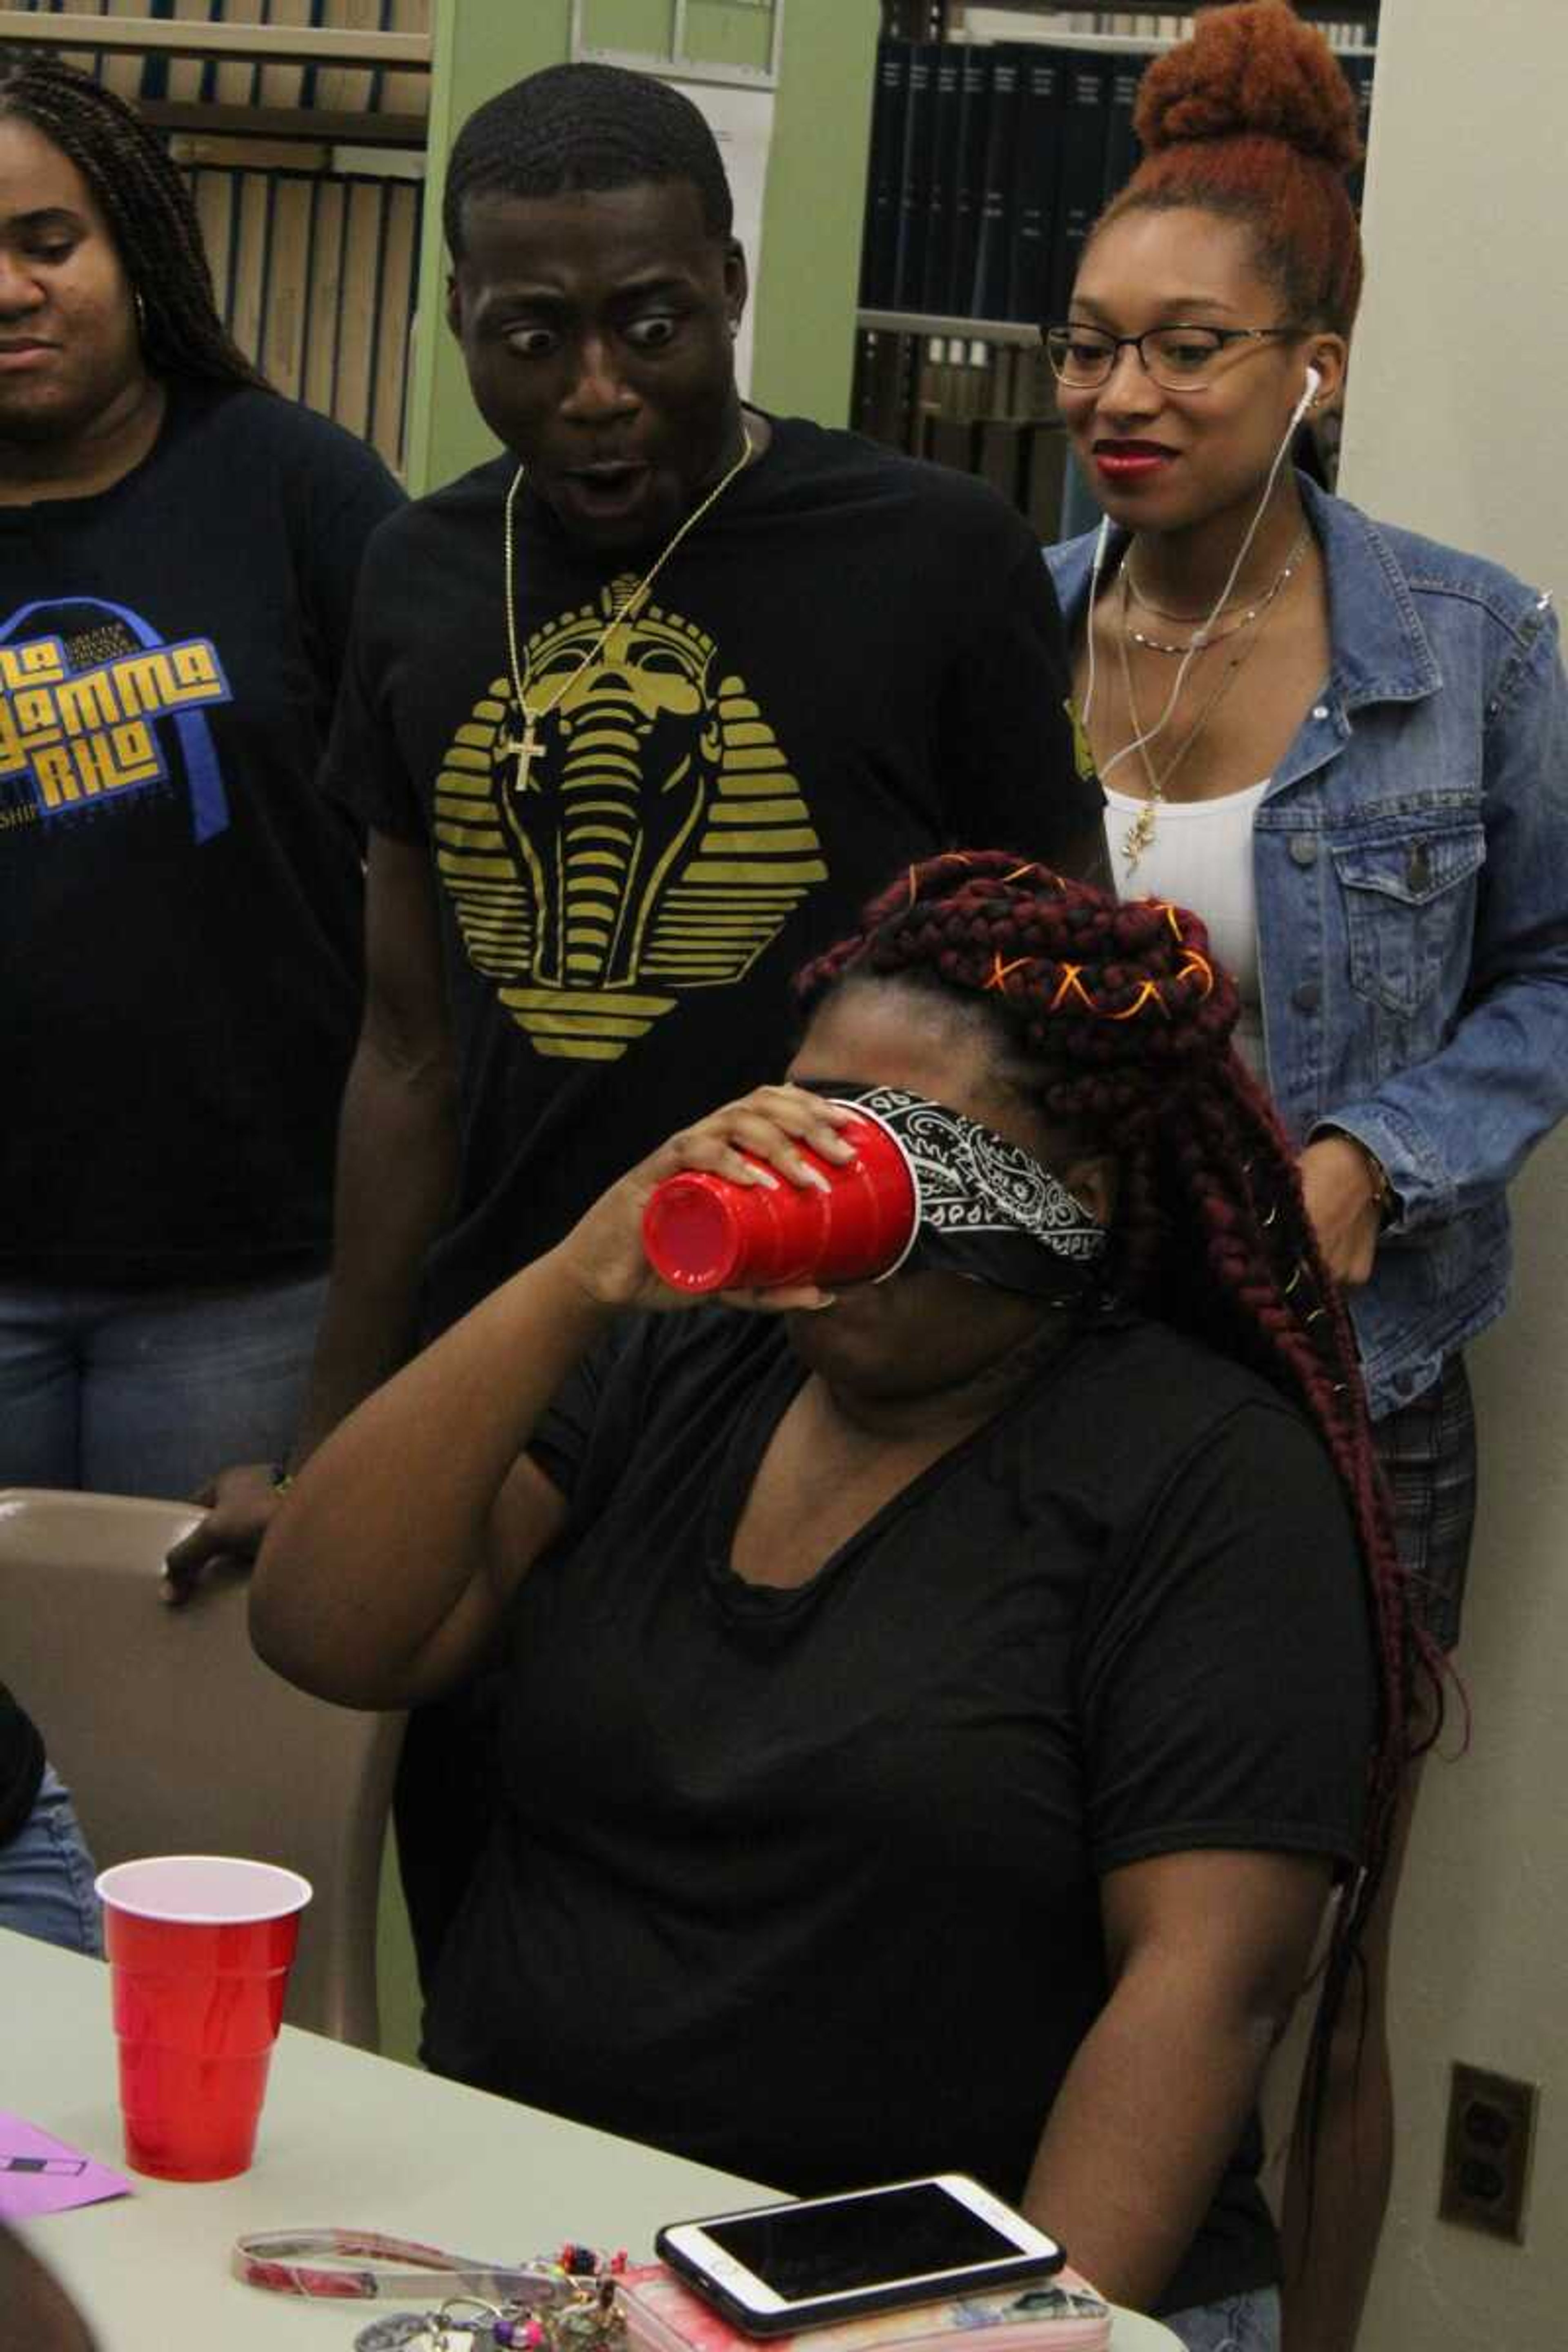 Member of National Pan-Hellenic Council completes challenge by drinking tomato juice blindfolded on Oct. 8